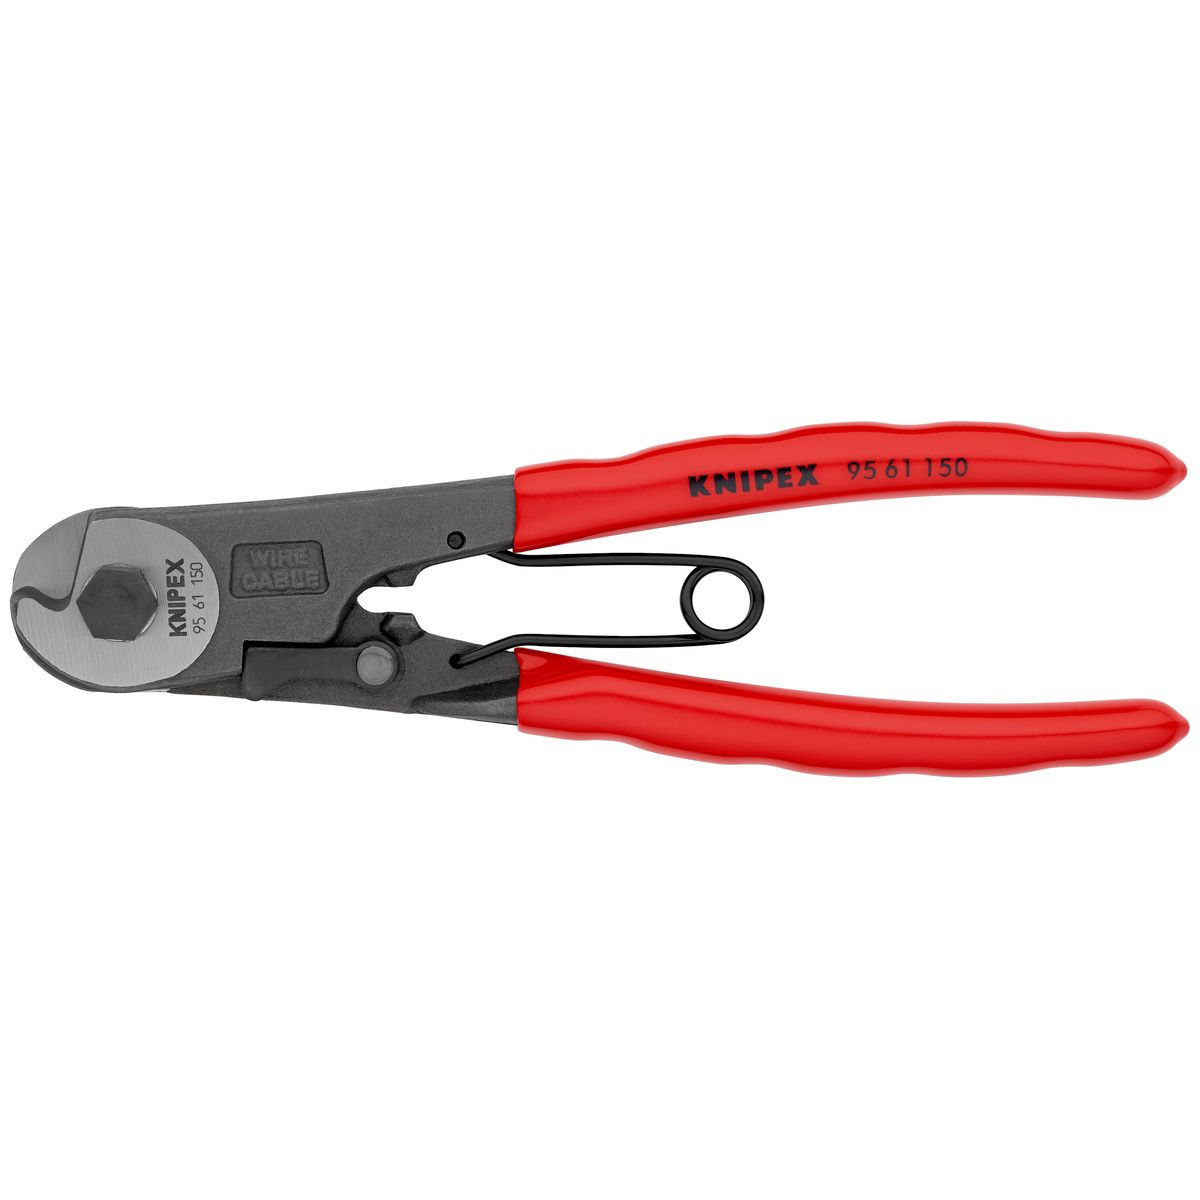 Cable Cutter Bowden 9561 150mm Knipex